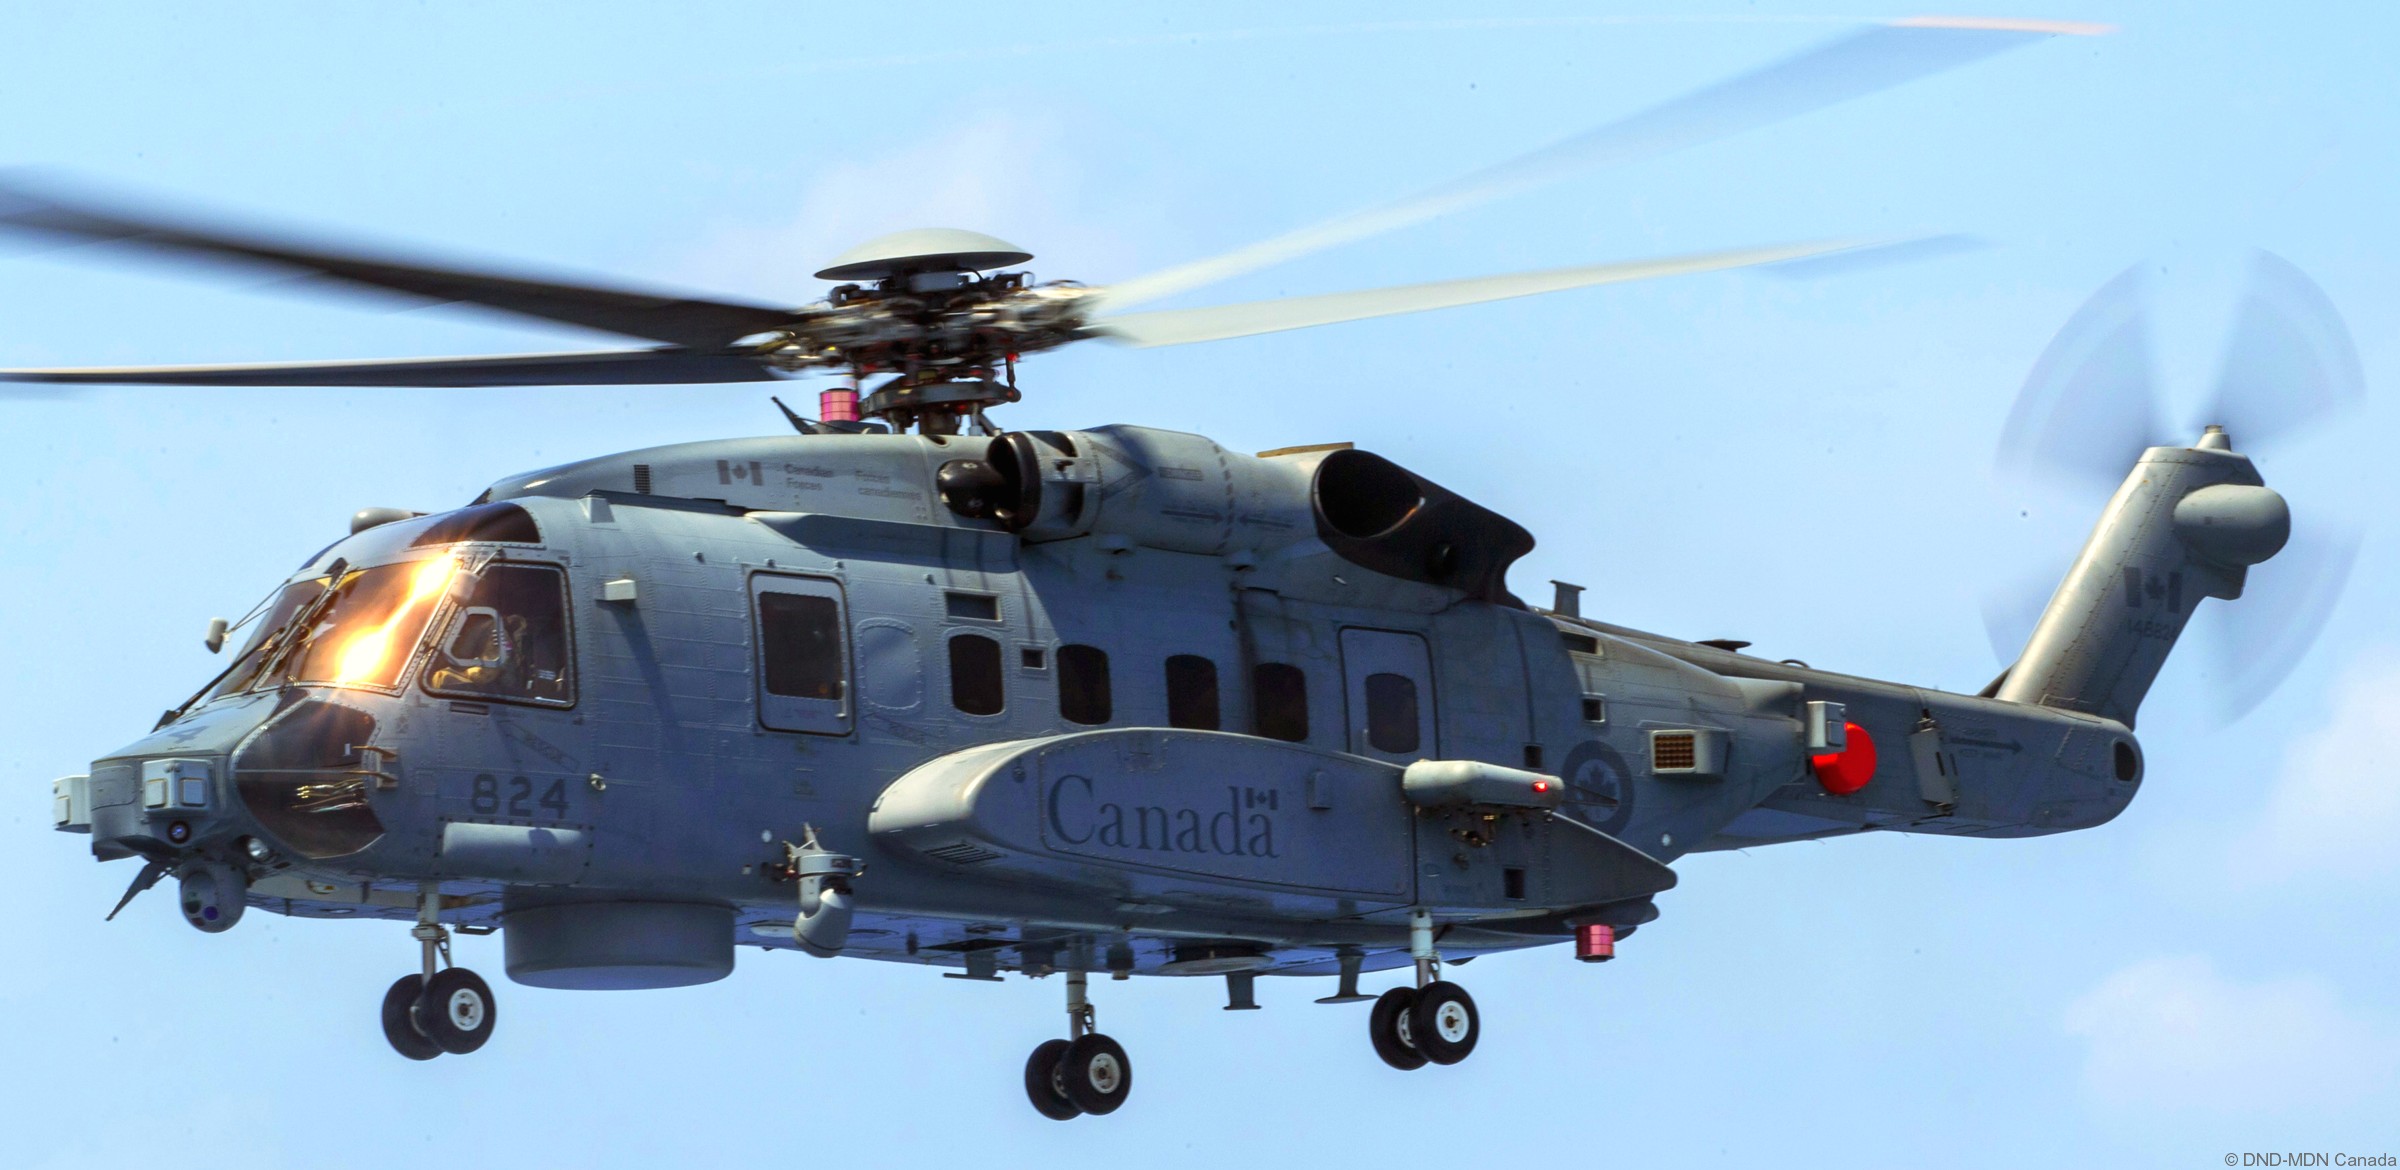 ch-148 cyclone naval helicopter royal canadian air force navy rcaf sikorsky hmcs 406 423 443 maritime squadron 31